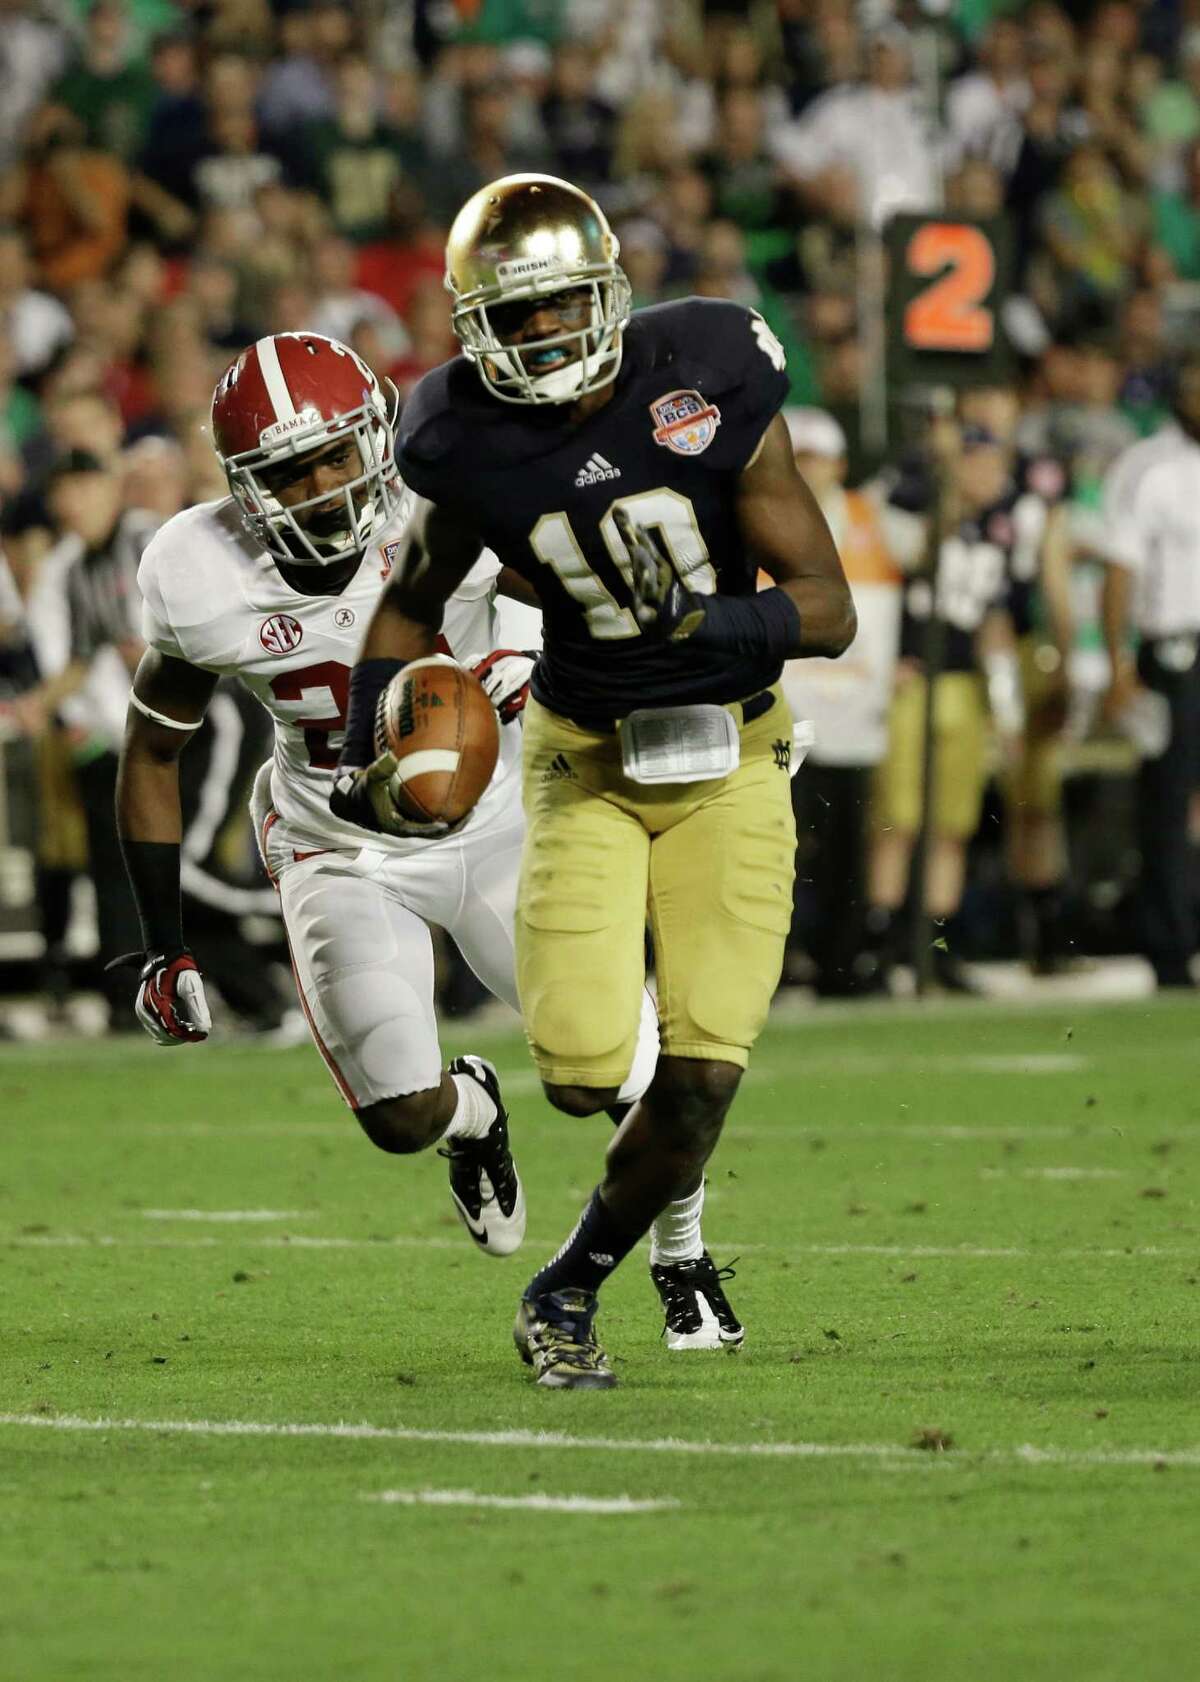 Notre Dame wide receiver DaVaris Daniels (10) makes a catch against Alabama during the second half of the BCS National Championship college football game Monday, Jan. 7, 2013, in Miami. (AP Photo/David J. Phillip)